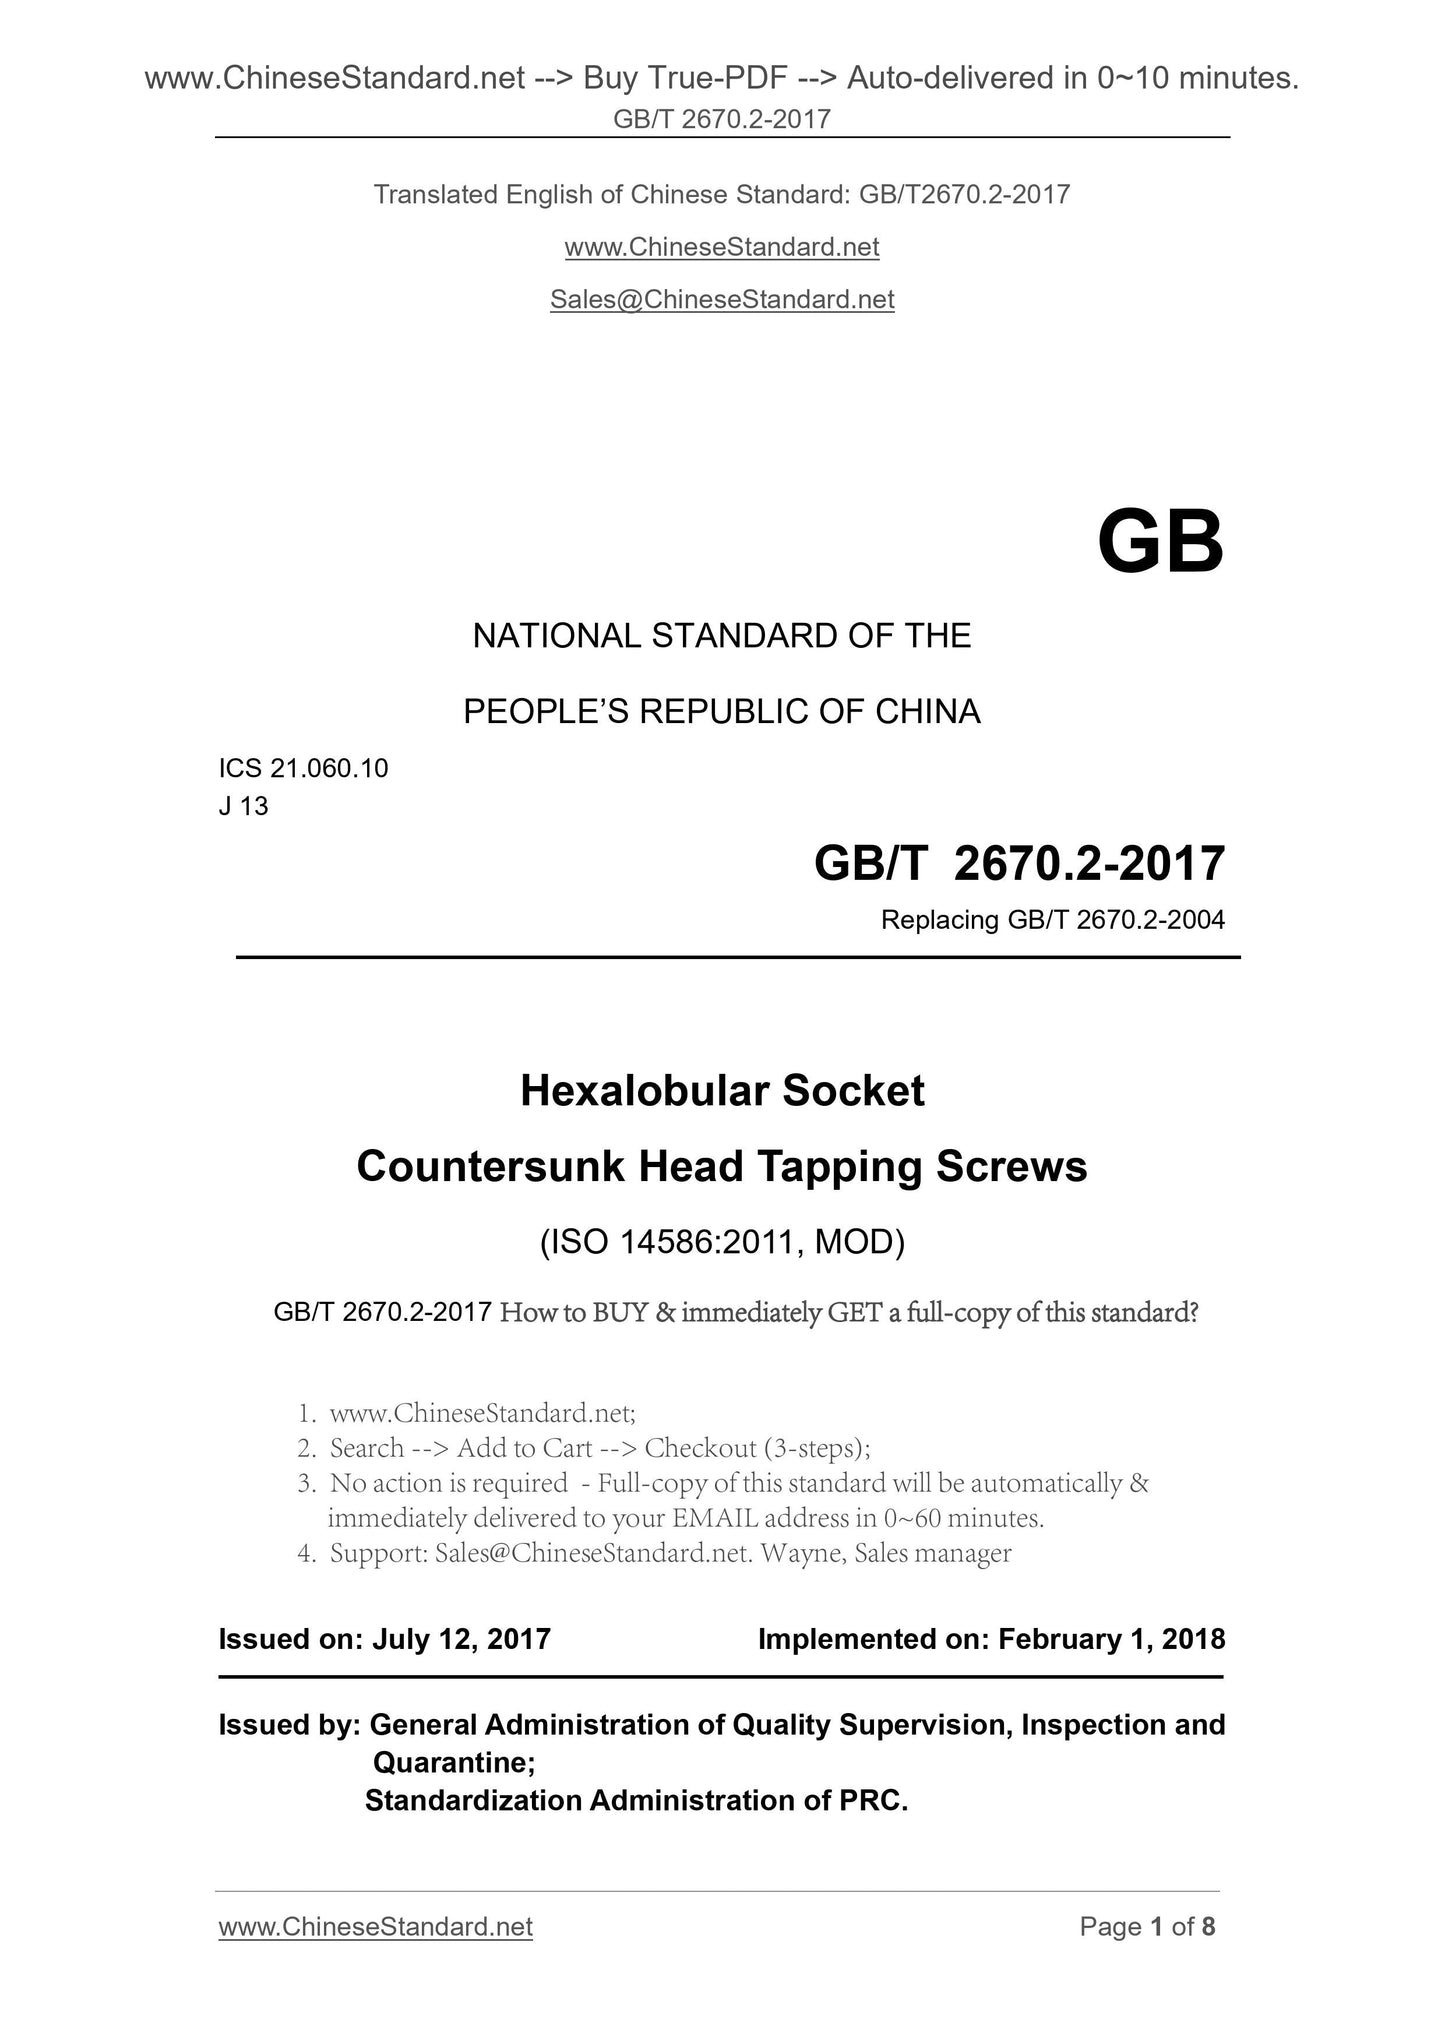 GB/T 2670.2-2017 Page 1